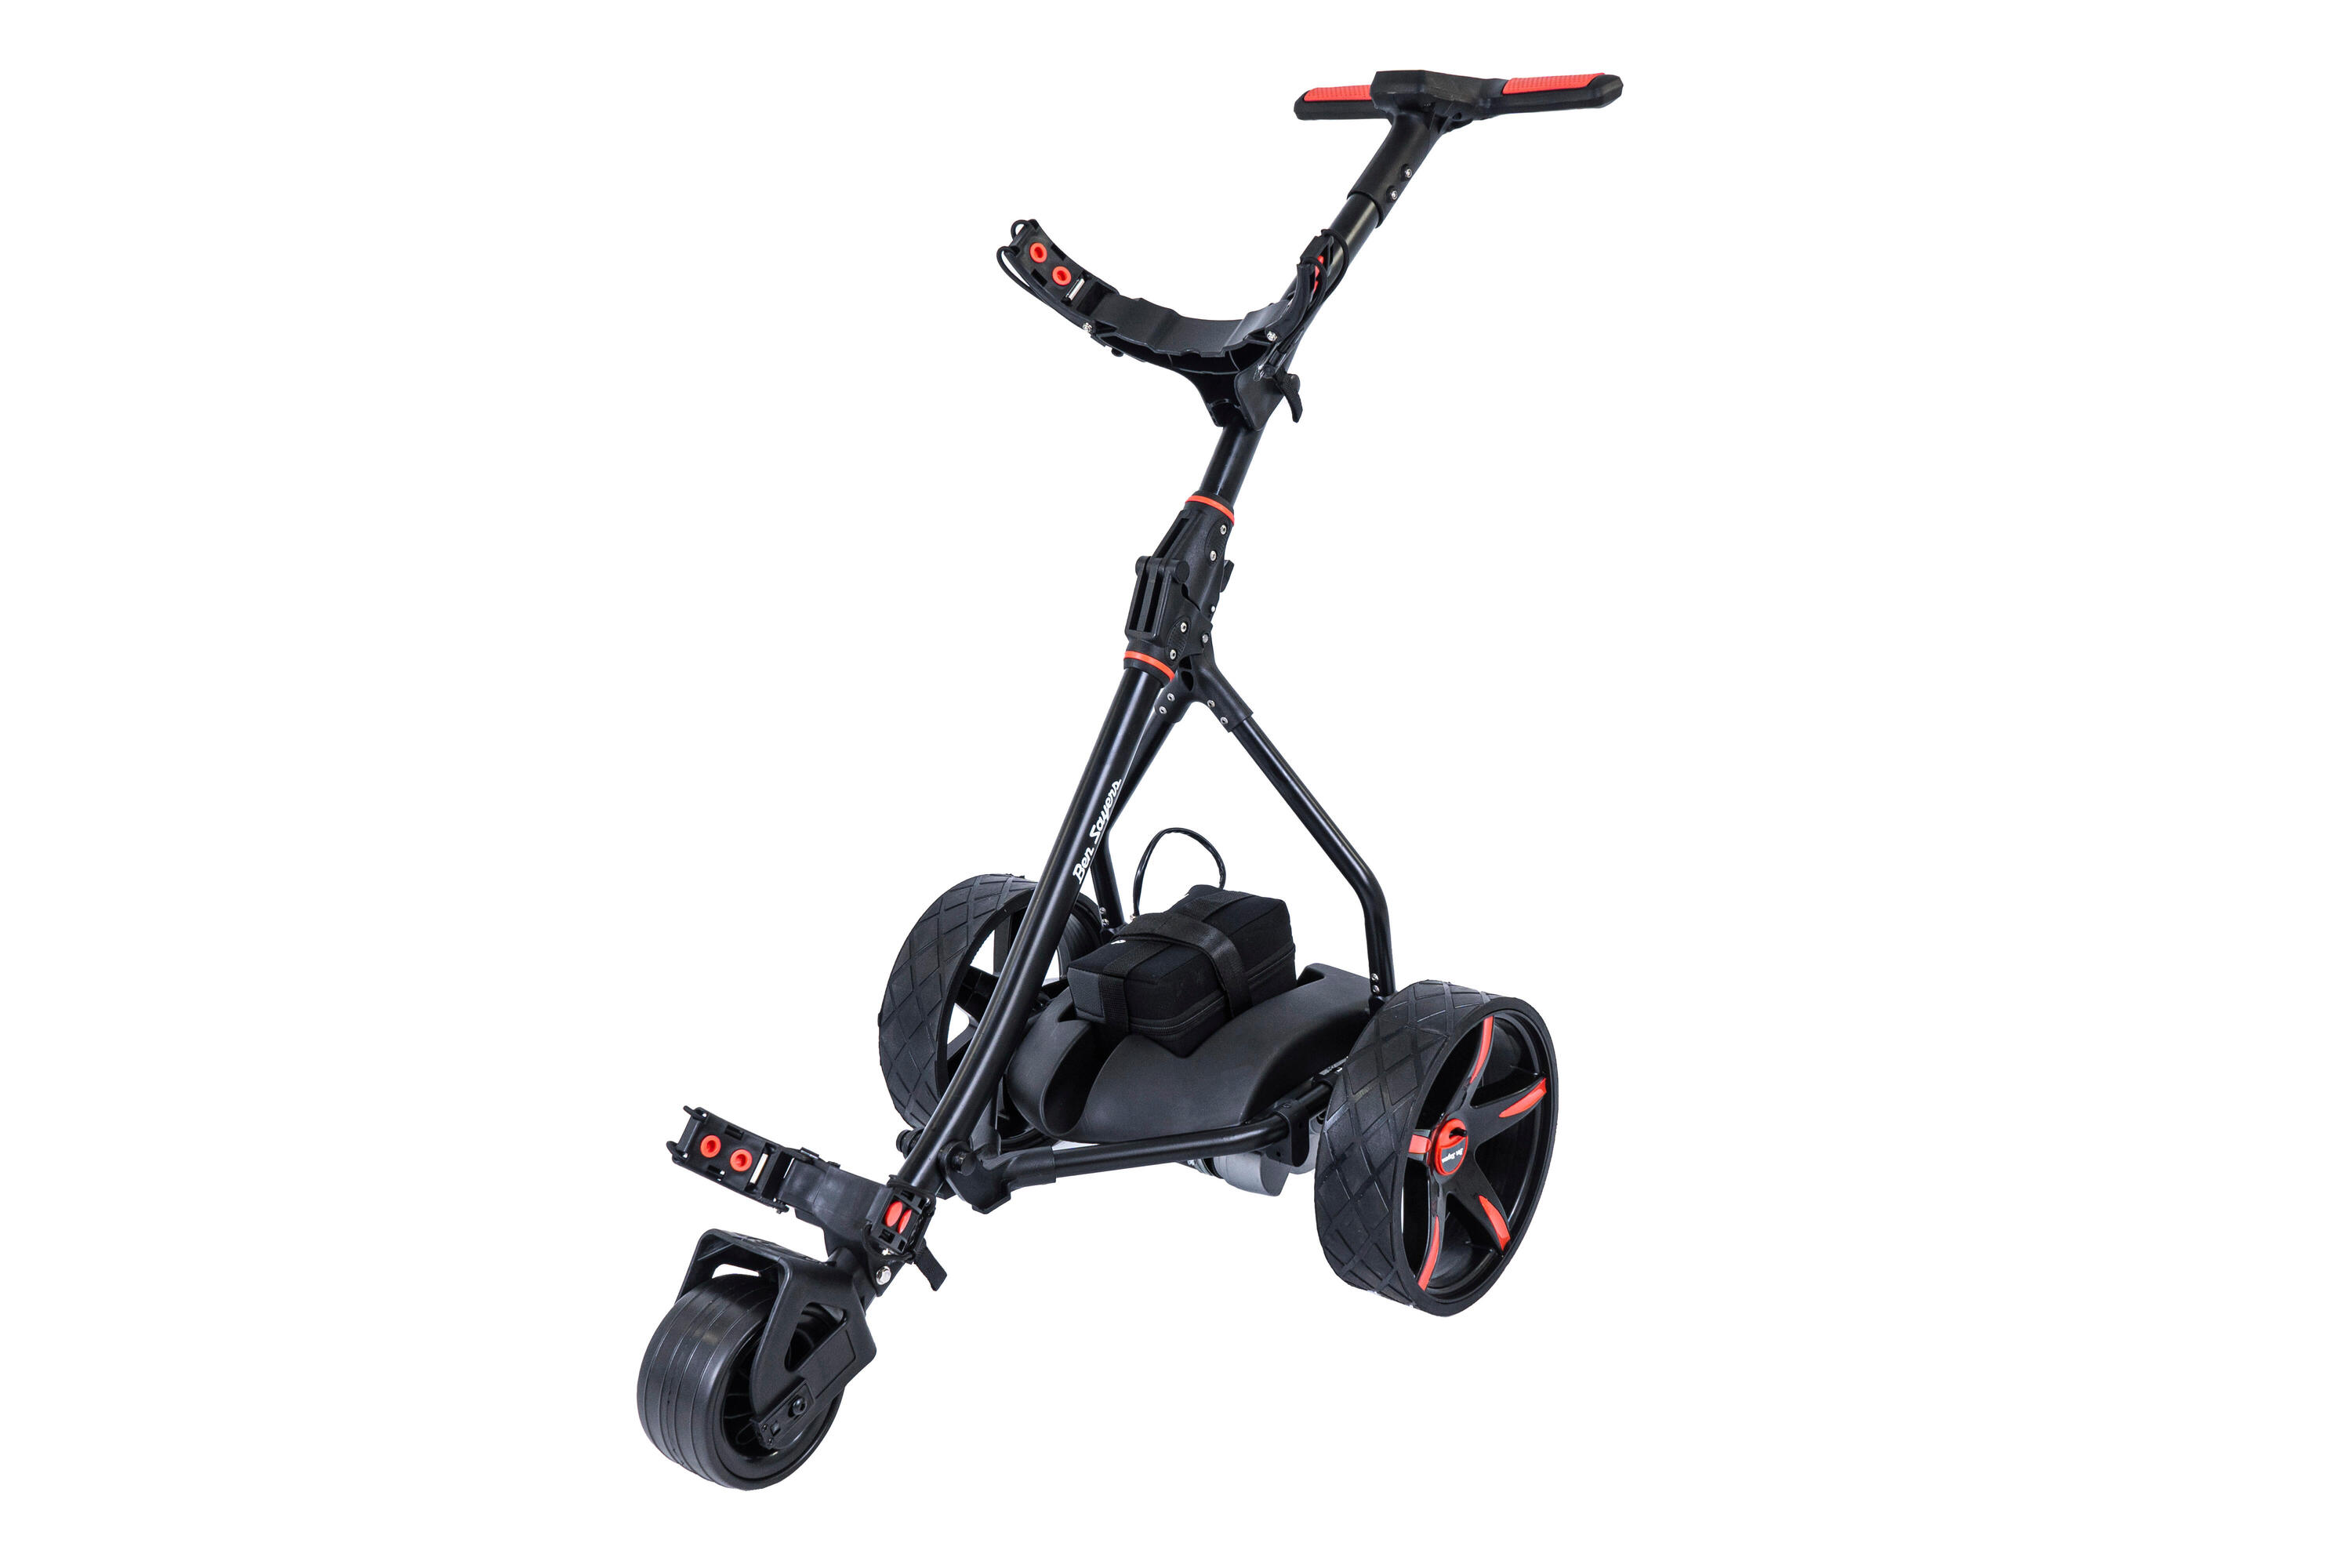 Ben Sayers 18-Hole Lithium Battery Trolley - Black/Red 1/7